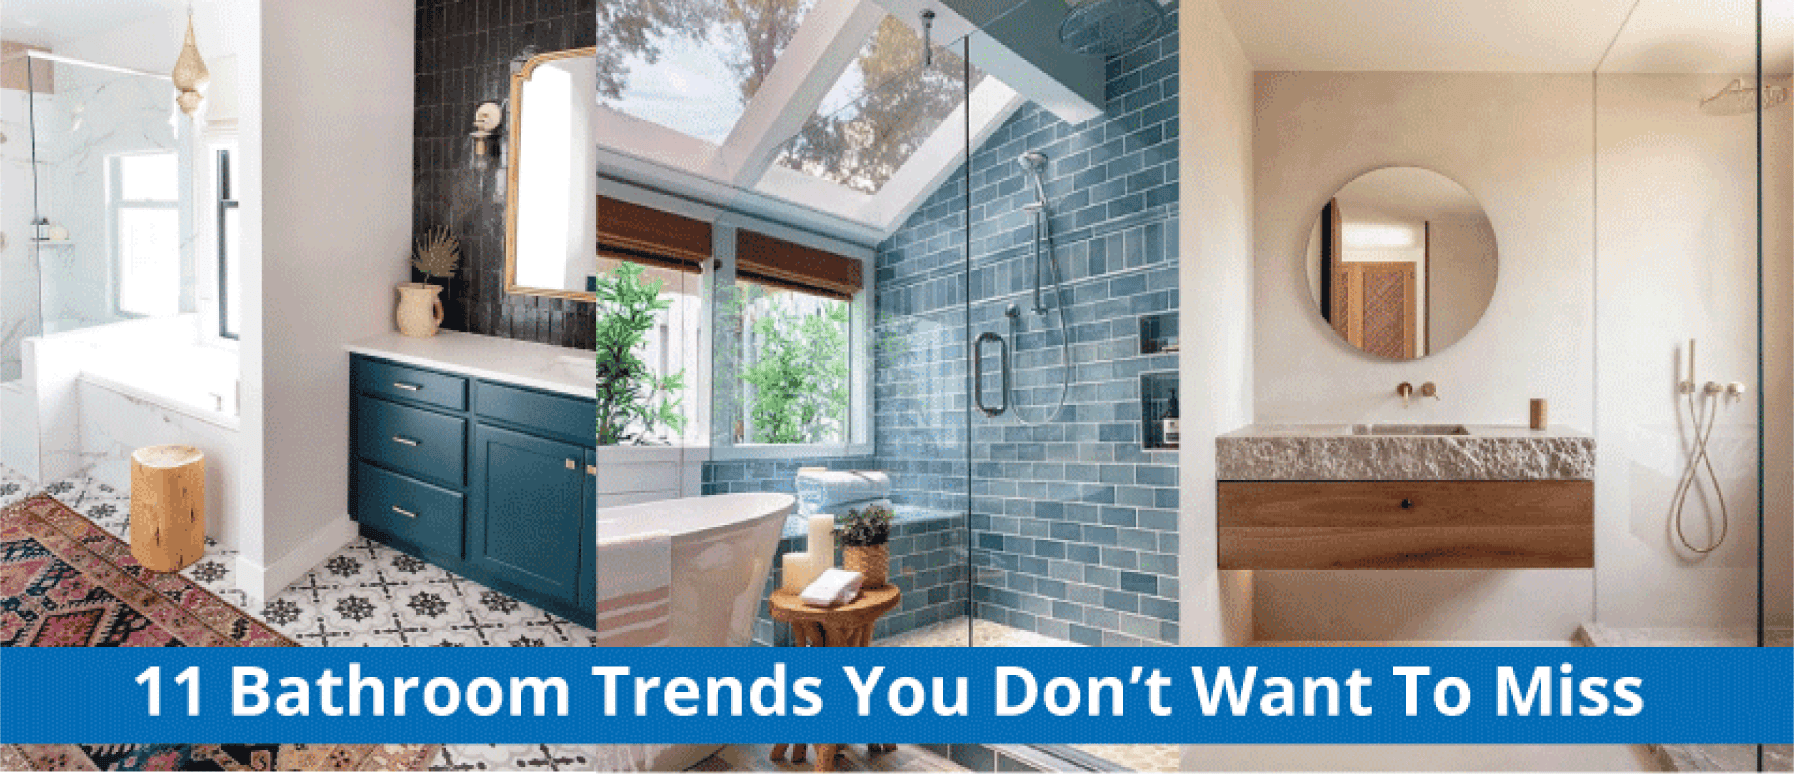 Three images of bathrooms, 1st being a bohemian bathroom with white bathtub and rectangular mirror, 2nd being a large bathroom with blue tile and large shower doors, and third being a beige bathroom with a round mirror mounted above the sink. The text "11